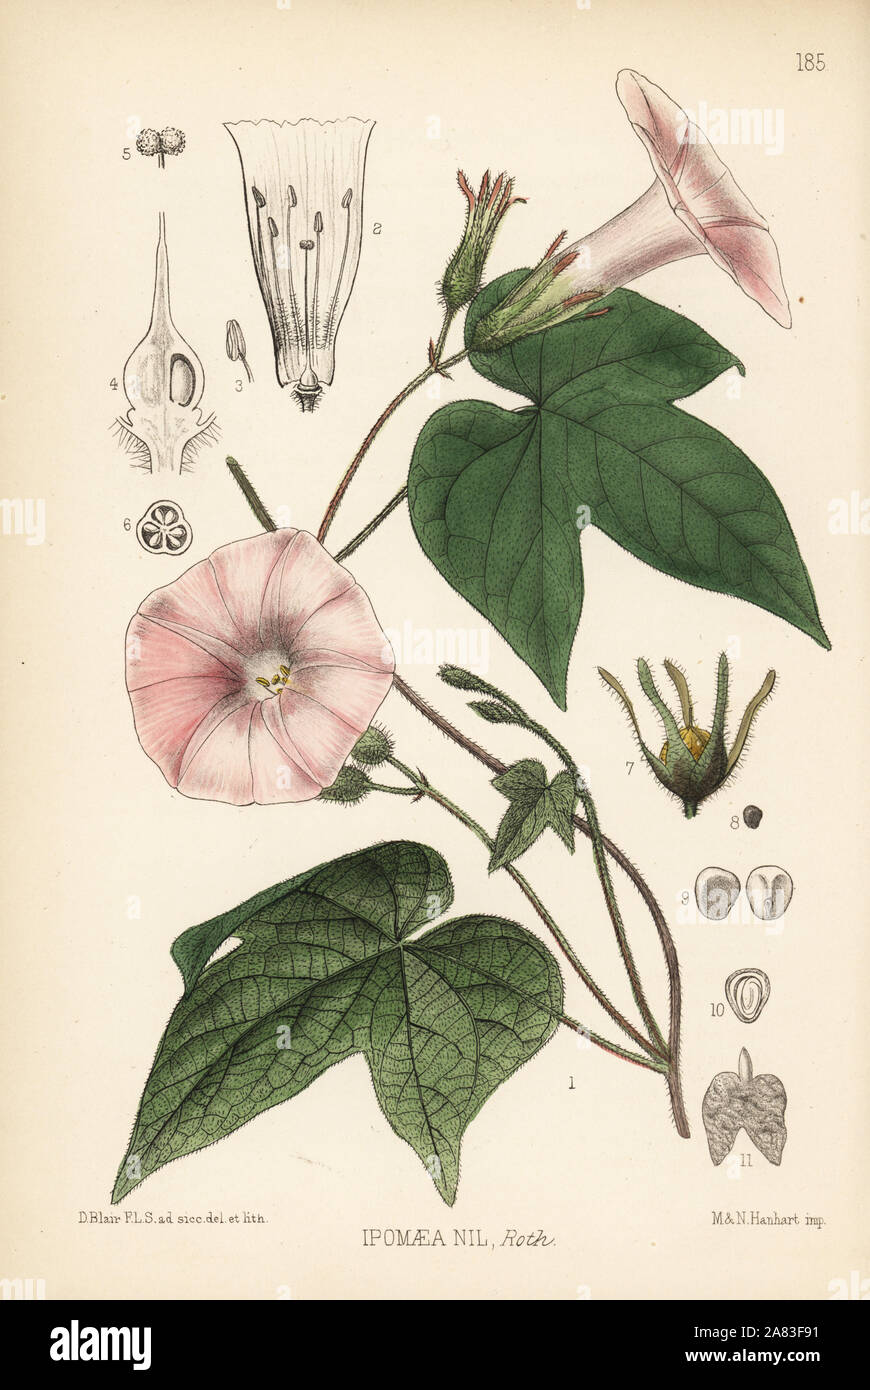 Kaladana or picotee morning glory, Ipomoea nil. Handcoloured lithograph by Hanhart after a botanical illustration by David Blair from Robert Bentley and Henry Trimen's Medicinal Plants, London, 1880. Stock Photo